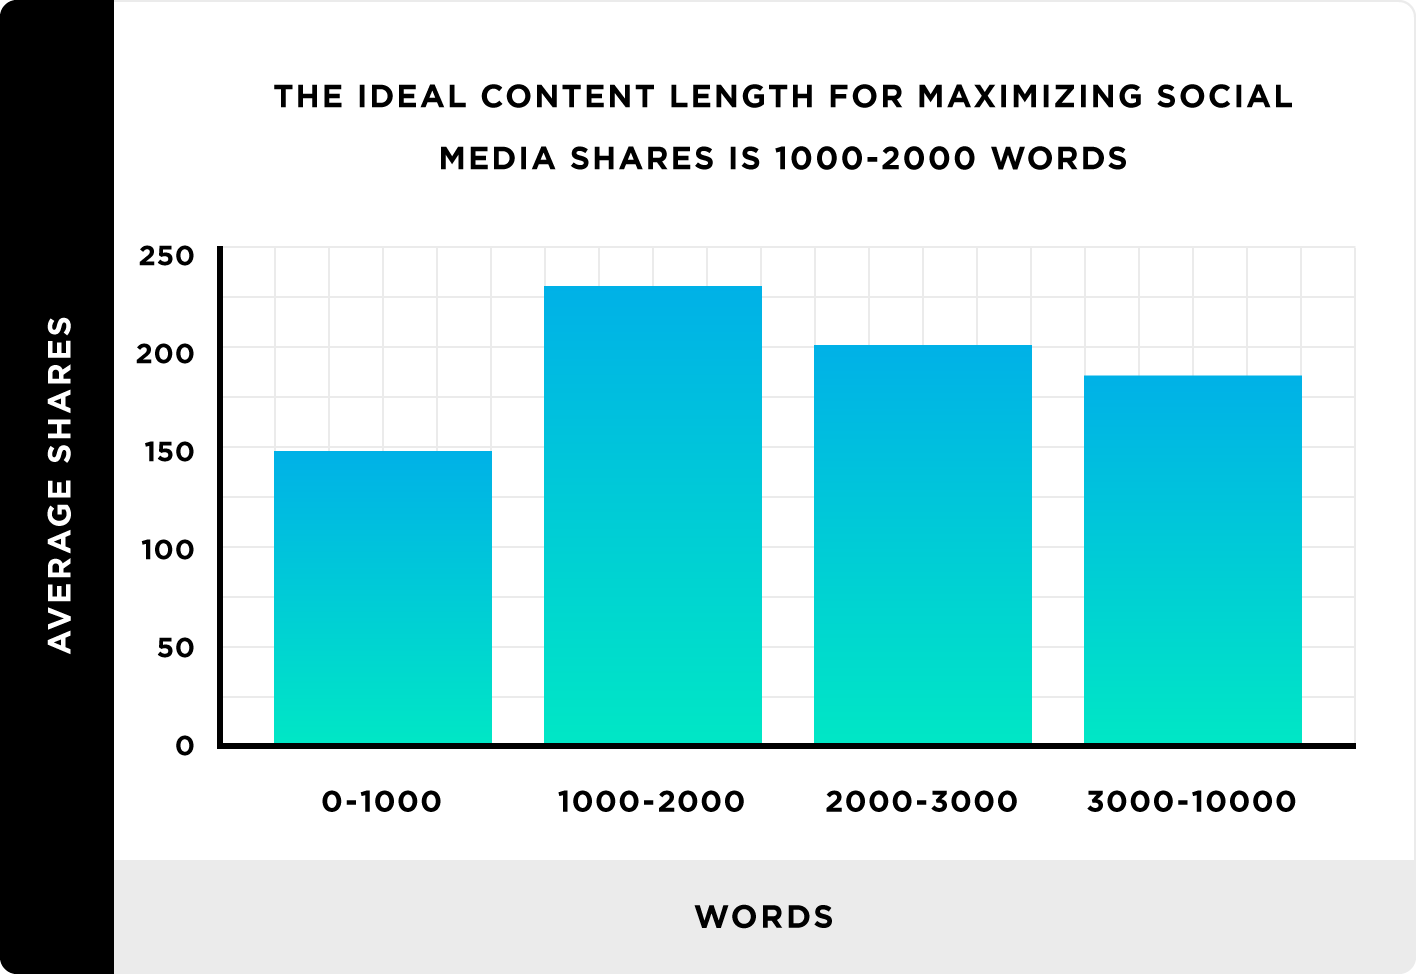 Backlinko: The ideal length of a blog post for social shares is 1000-2000 words.